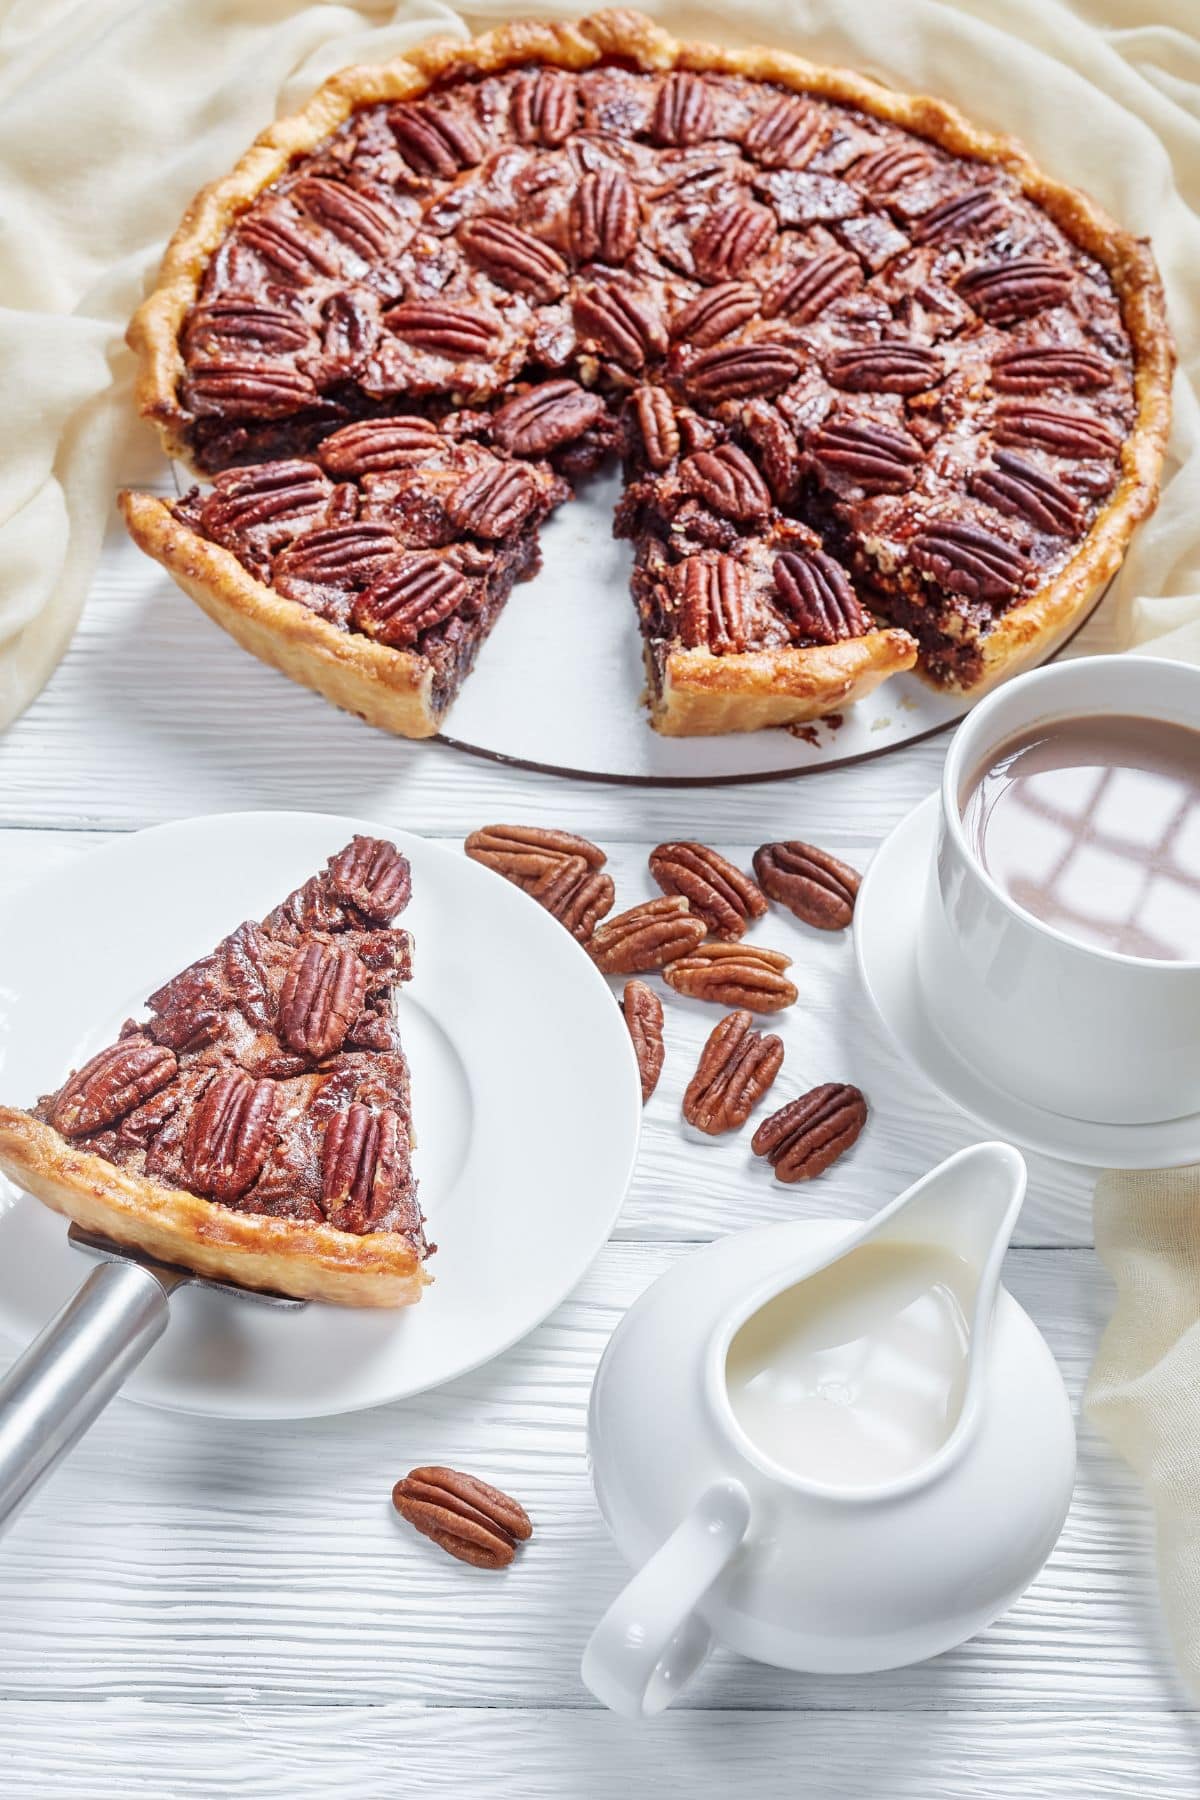 A pecan pie being cut and served with a cup of hot cocoa.